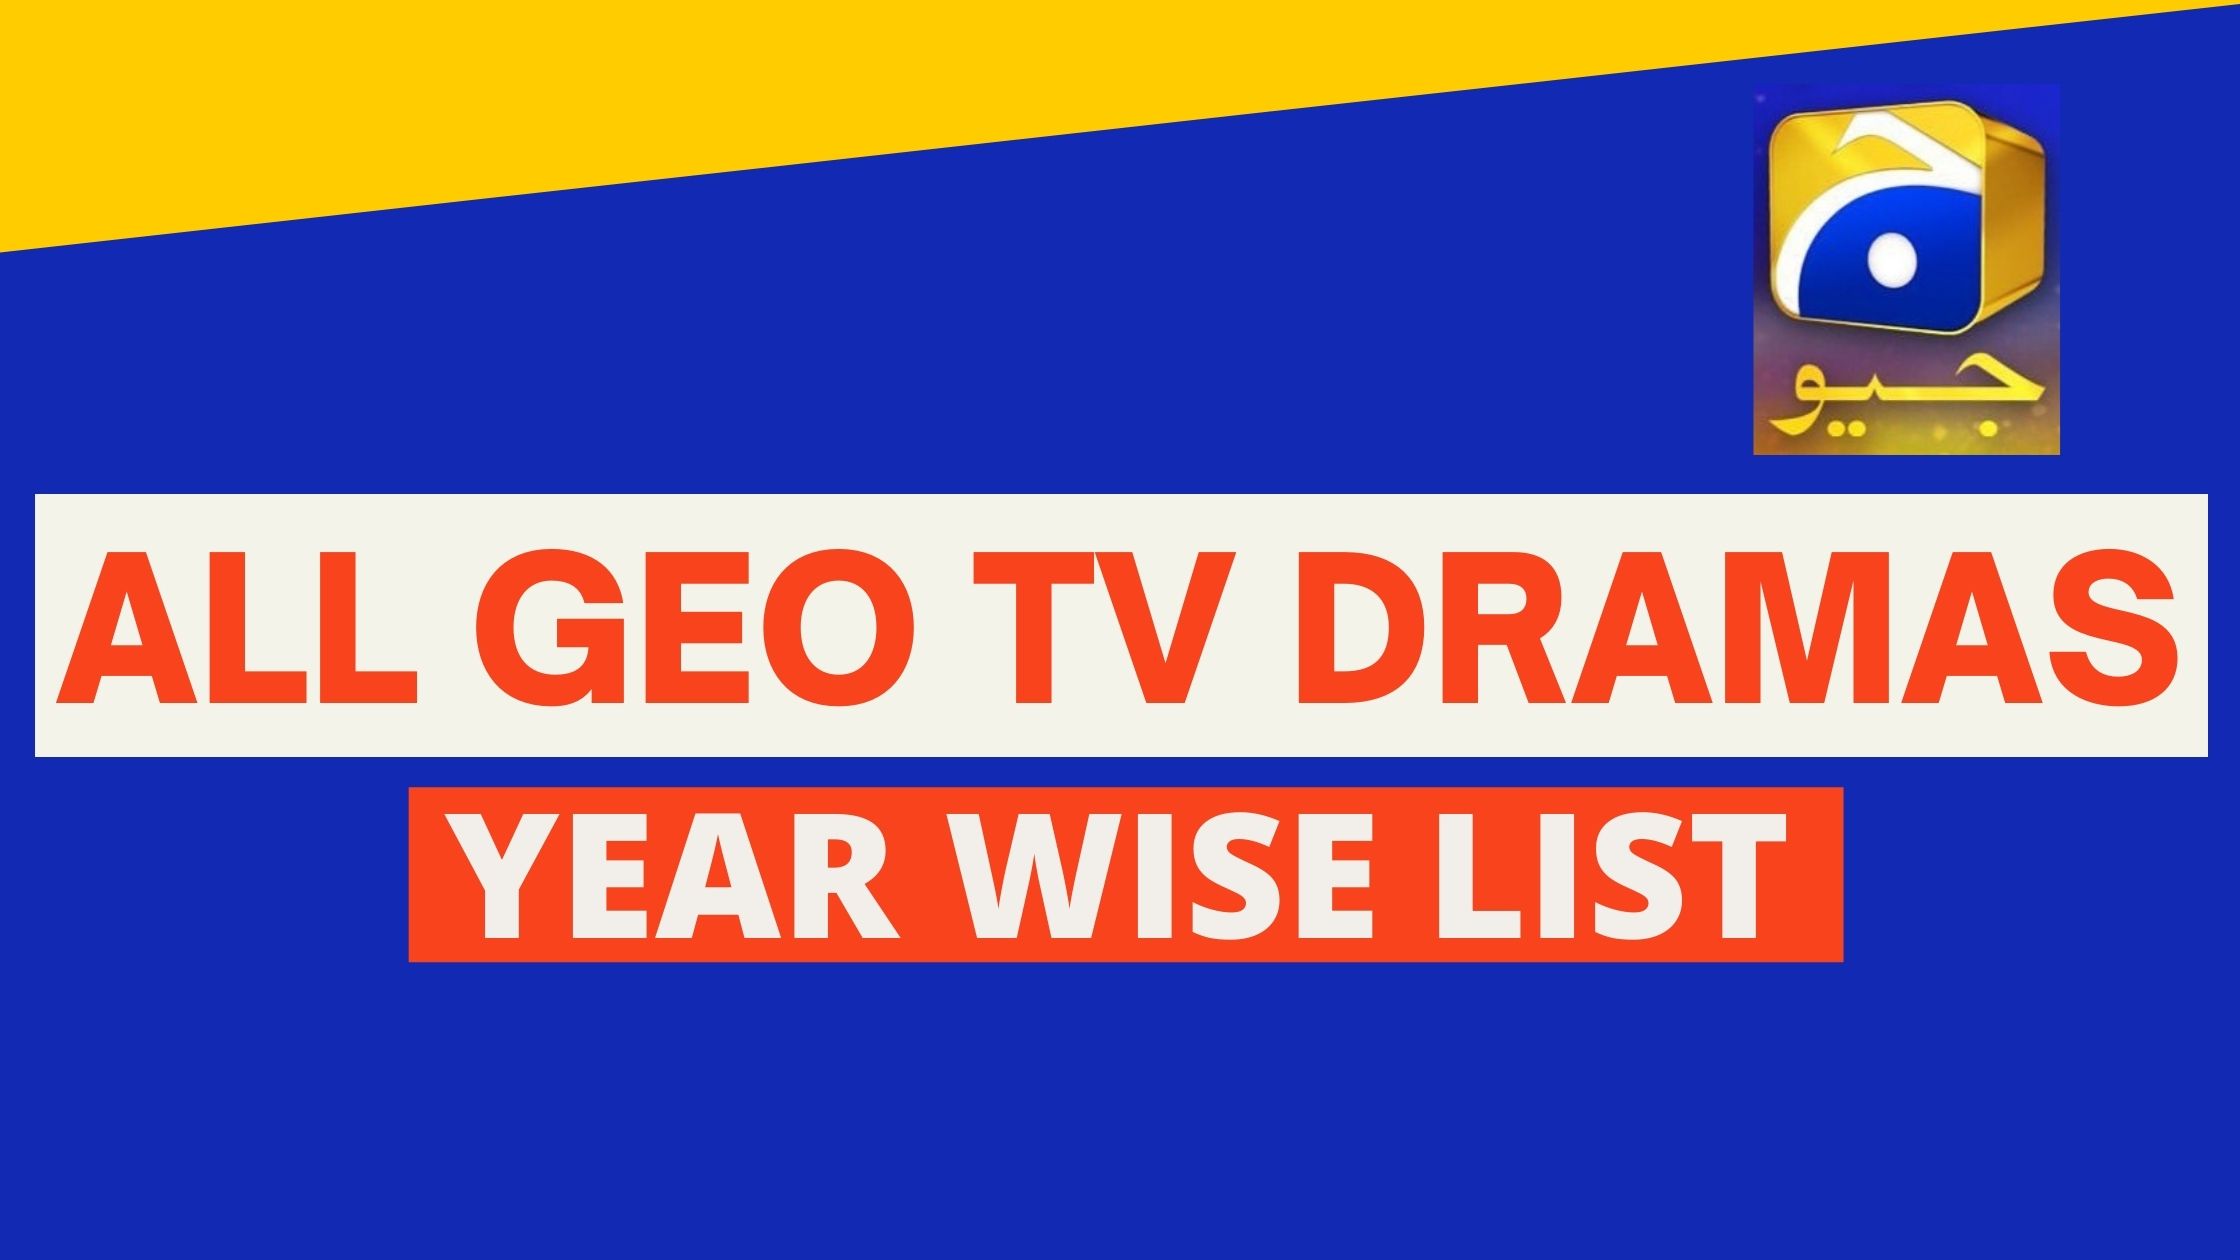 All Dramas Released by GEO TV (Year Wise List)